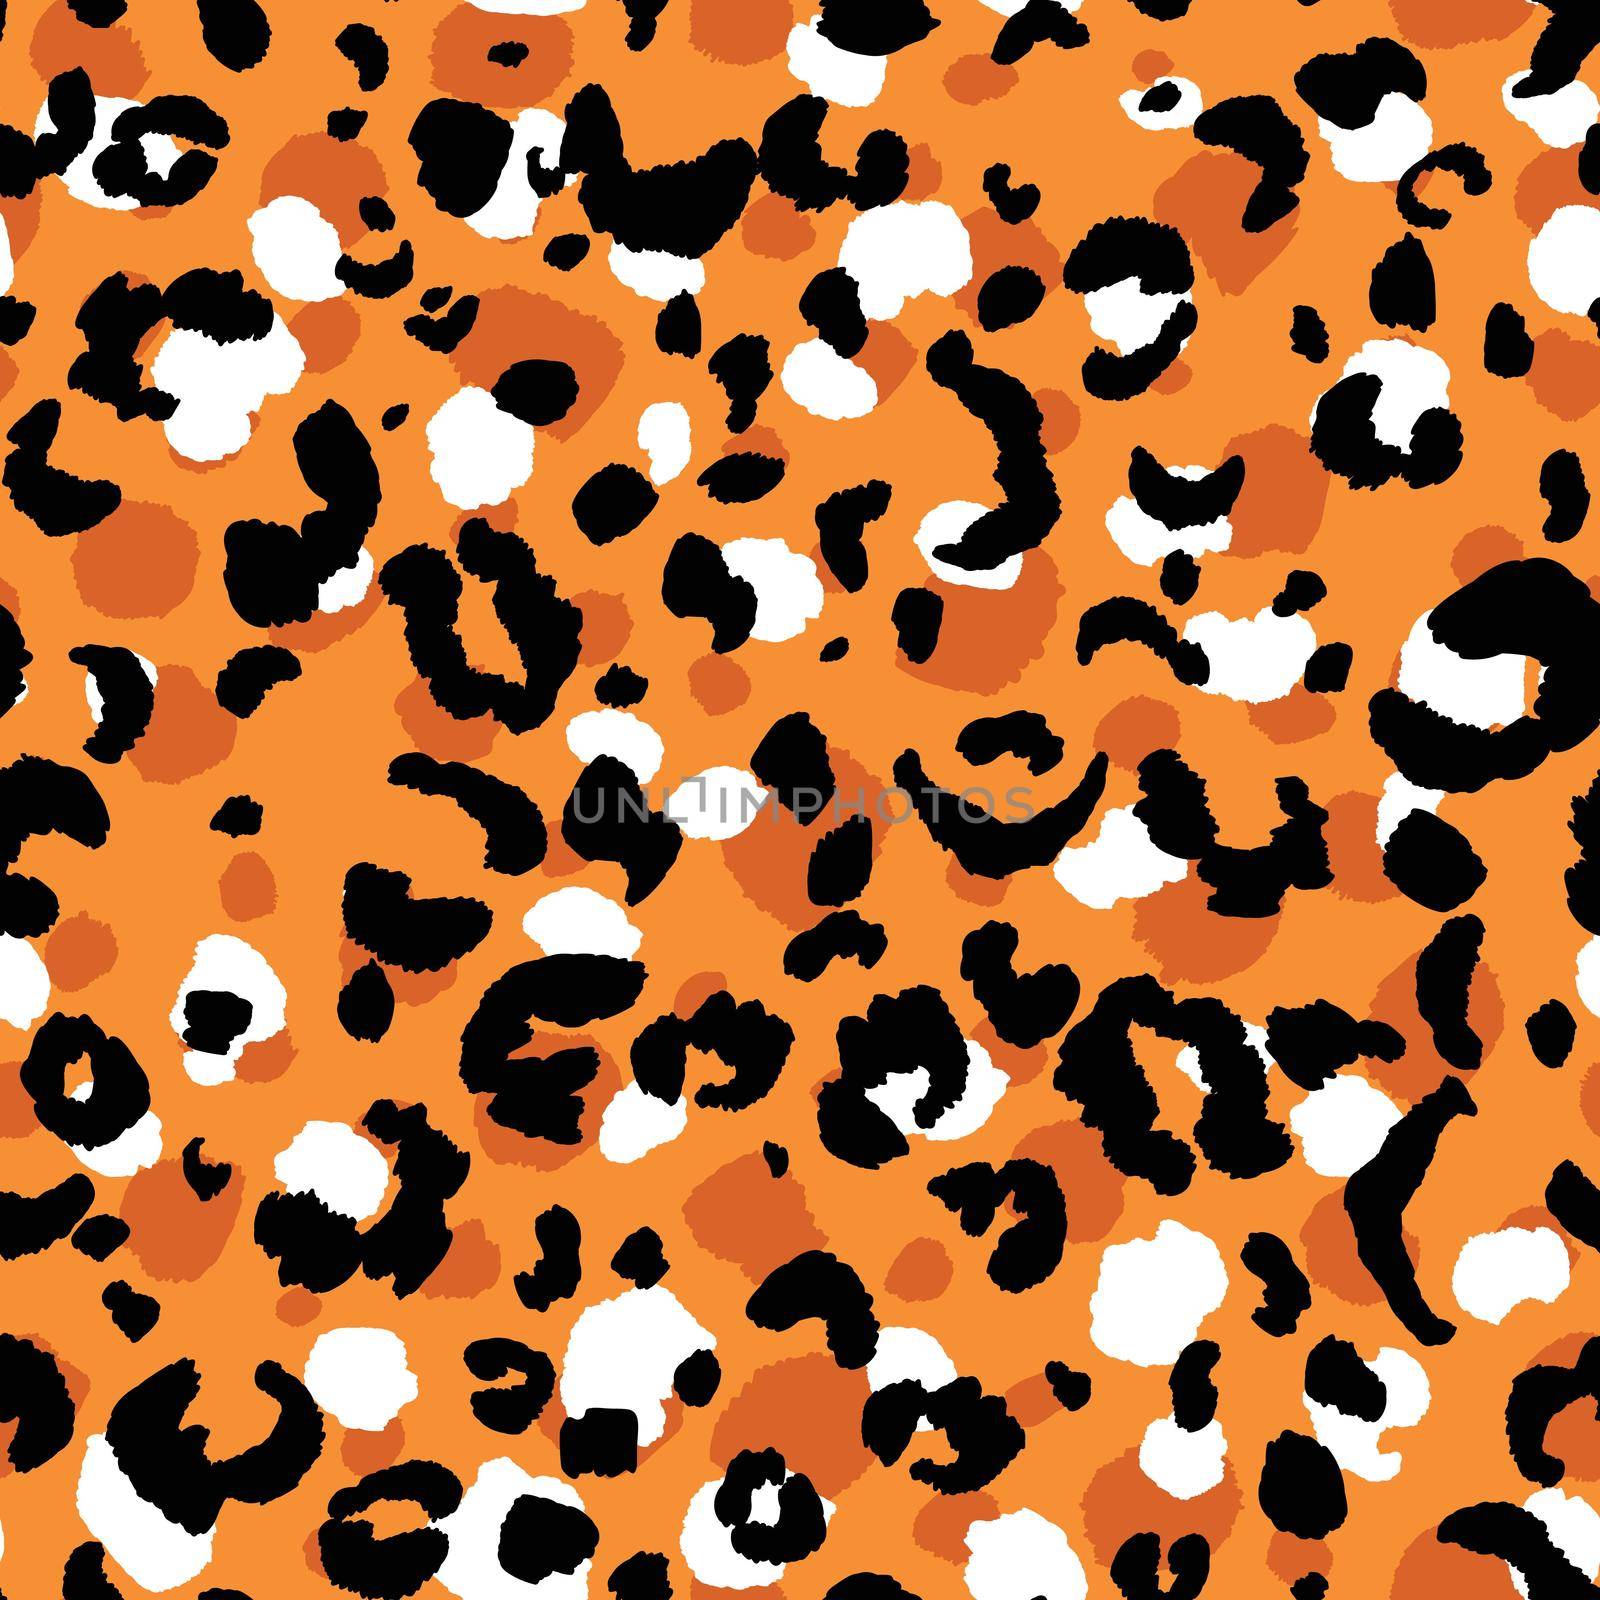 Abstract modern leopard seamless pattern. Animals trendy background. Orange and black decorative vector stock illustration for print, card, postcard, fabric, textile. Modern ornament of stylized skin.